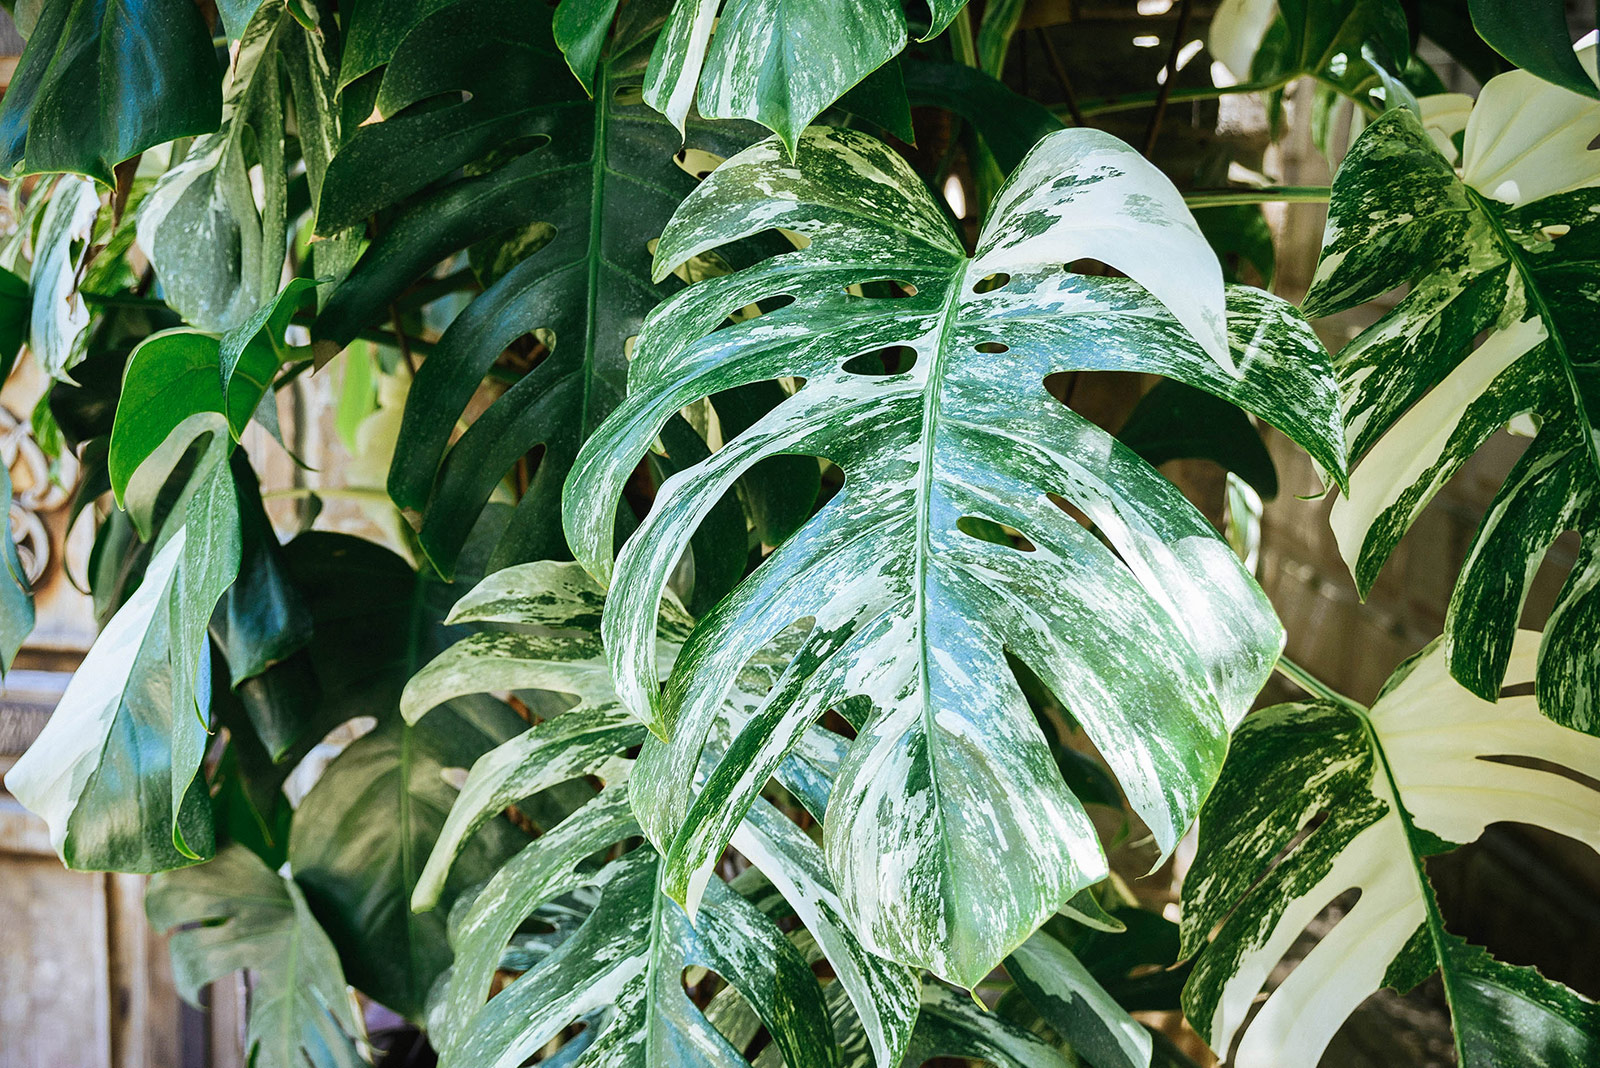 Large variegated Monstera Deliciosa plant with many fenestrate leaves